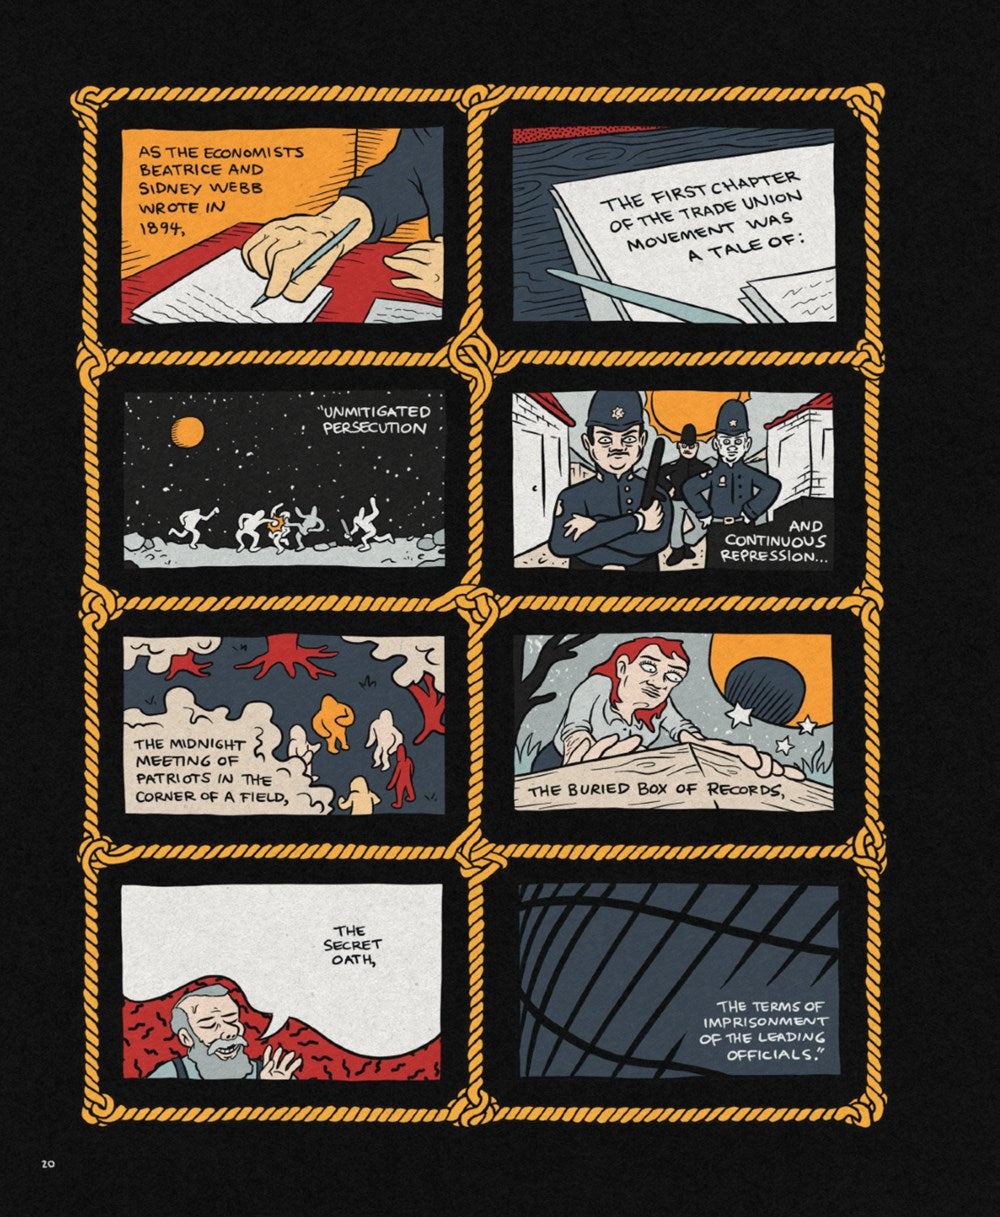 Our Members Be Unlimited: A Comic about Workers and Their Unions